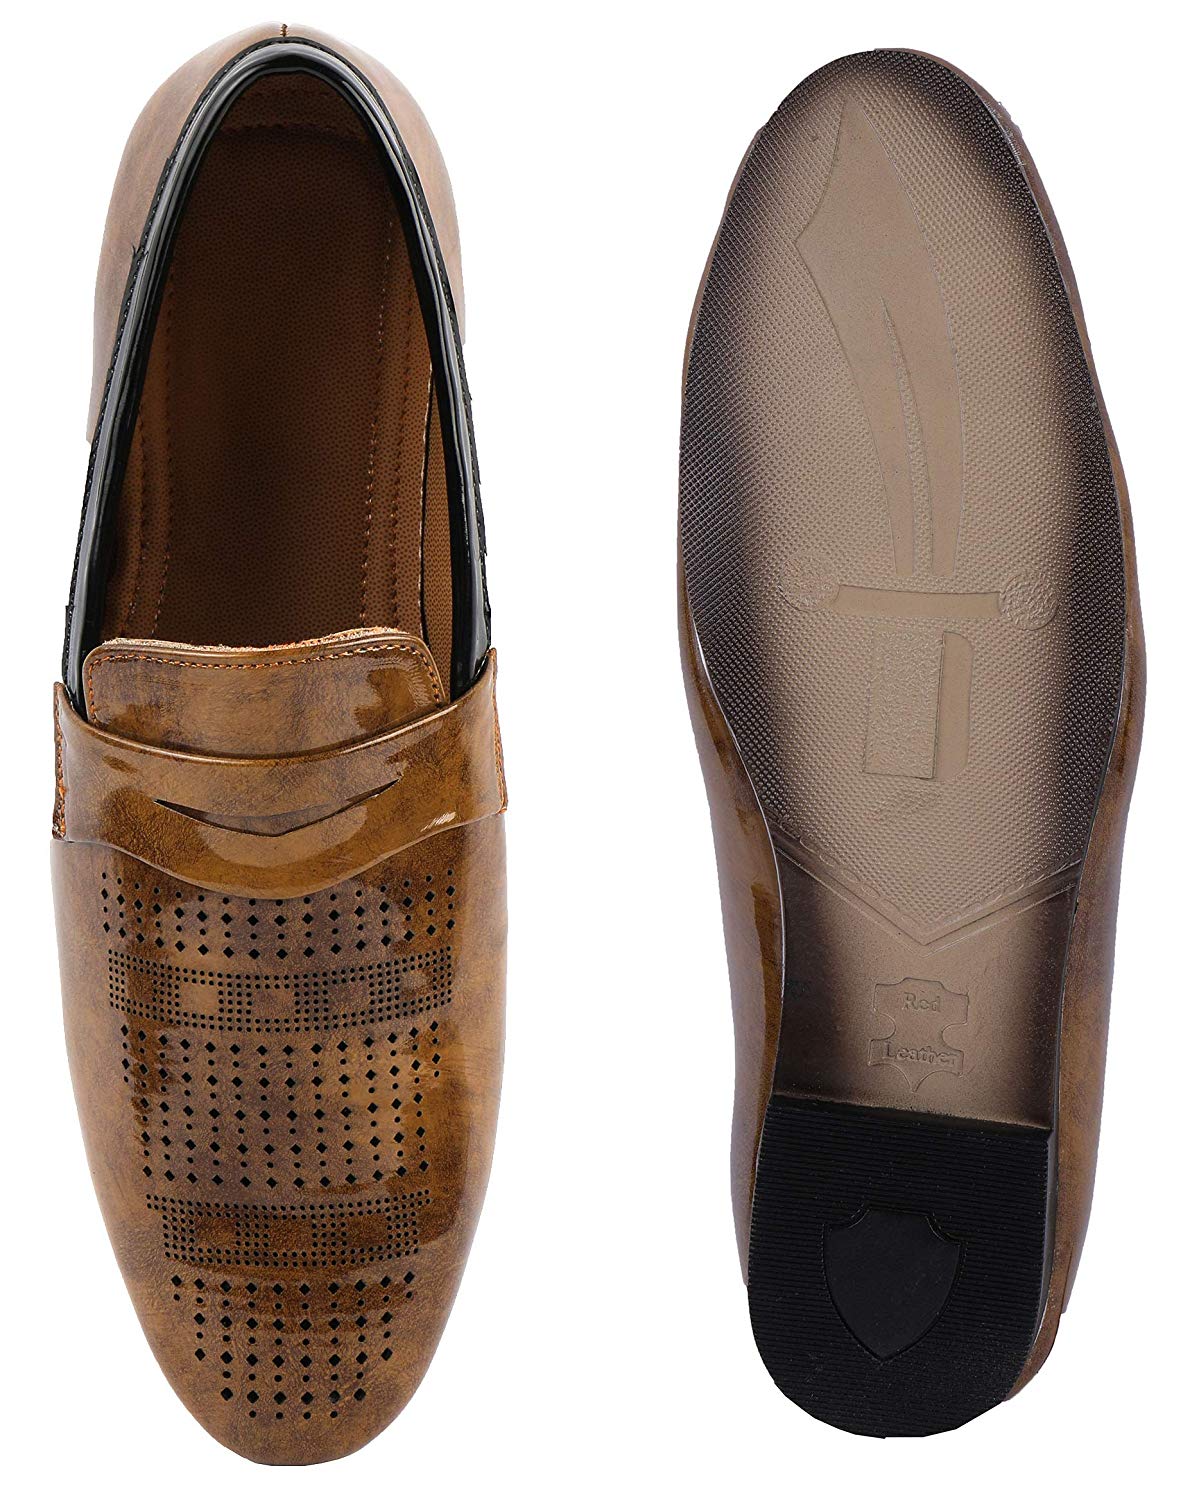 Buy Avr Gold Synthetic Leather Slip On Formal Shoes Online ₹499 From Shopclues 6119